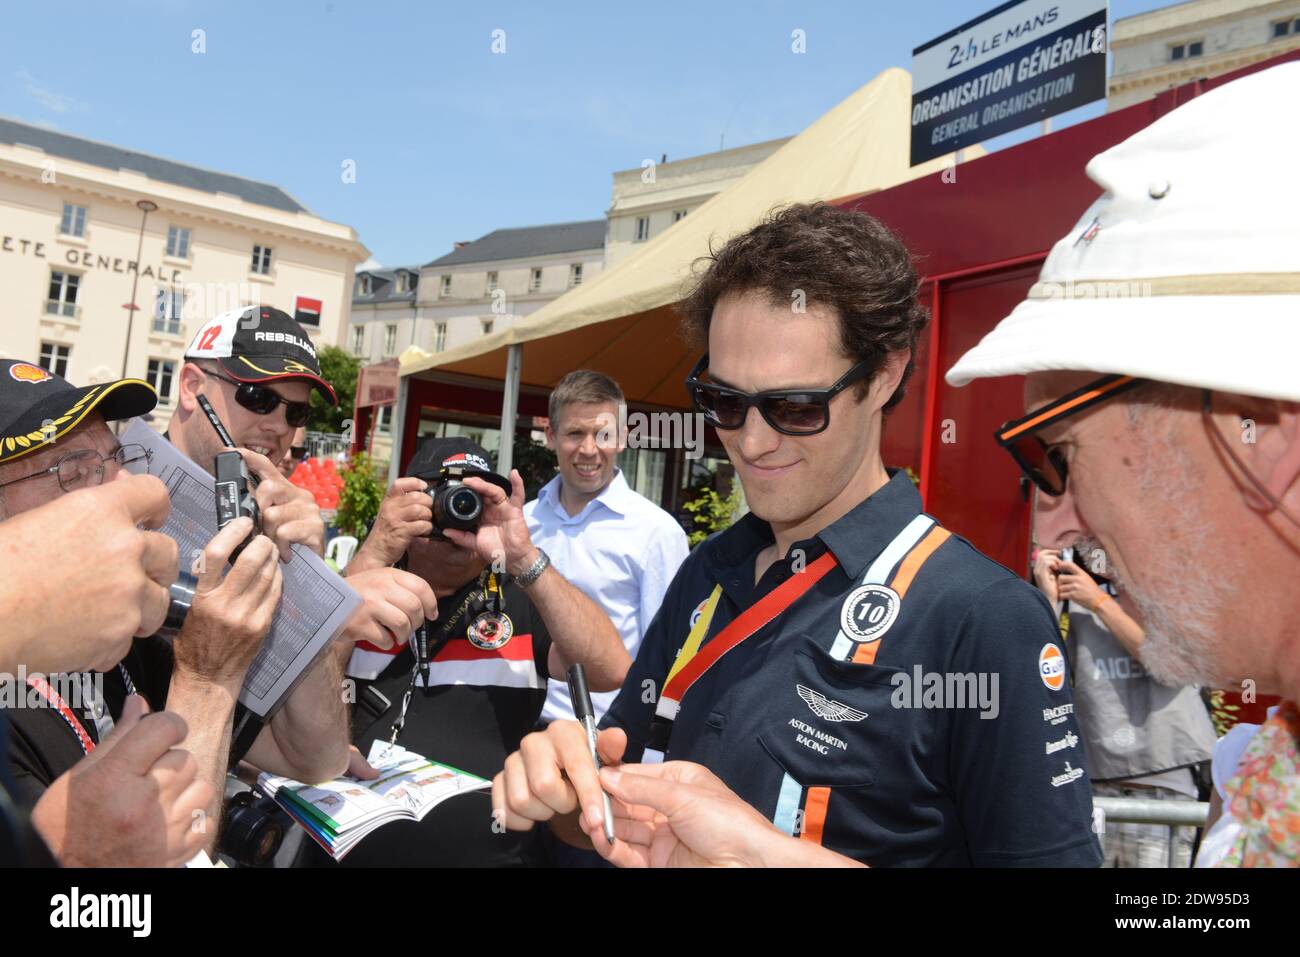 Brazilian driver Bruno Senna of Aston Martin V8 Vantage Lmgte Pro Team Aston Martin Racing during the 2014 scrutineering and qualifying sessions of the 24 Hours of Le Mans from June the 8th to the 12th 2014, at Le Mans circuit, France on June 9, 2014. Photo by Guy Durand/ABACAPRESS.COM Stock Photo